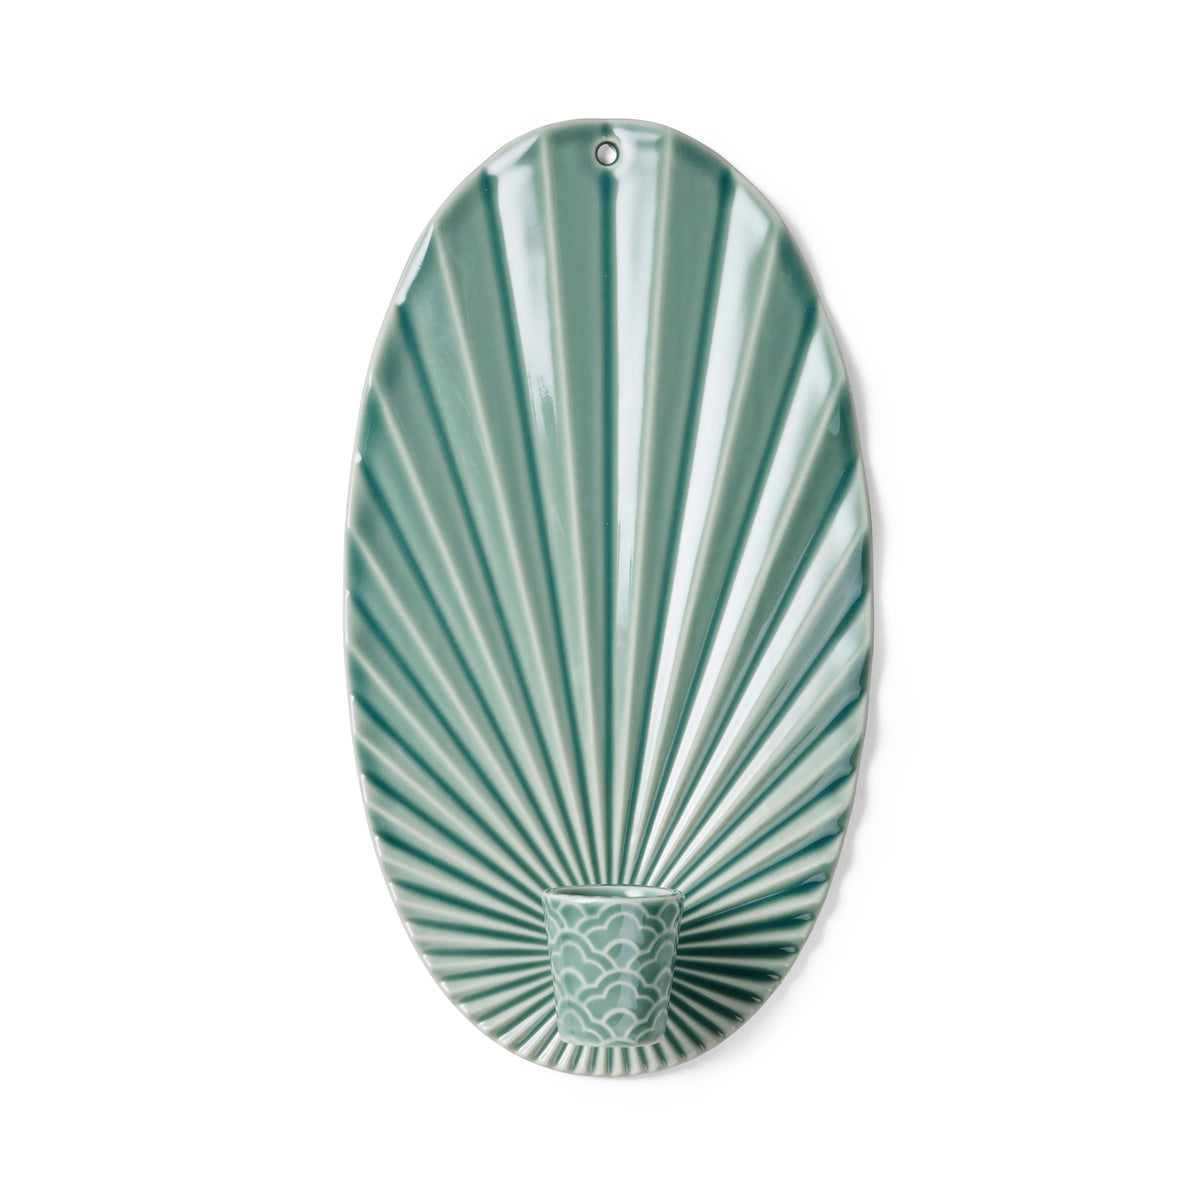 Pipanella Waves Candle Sconce